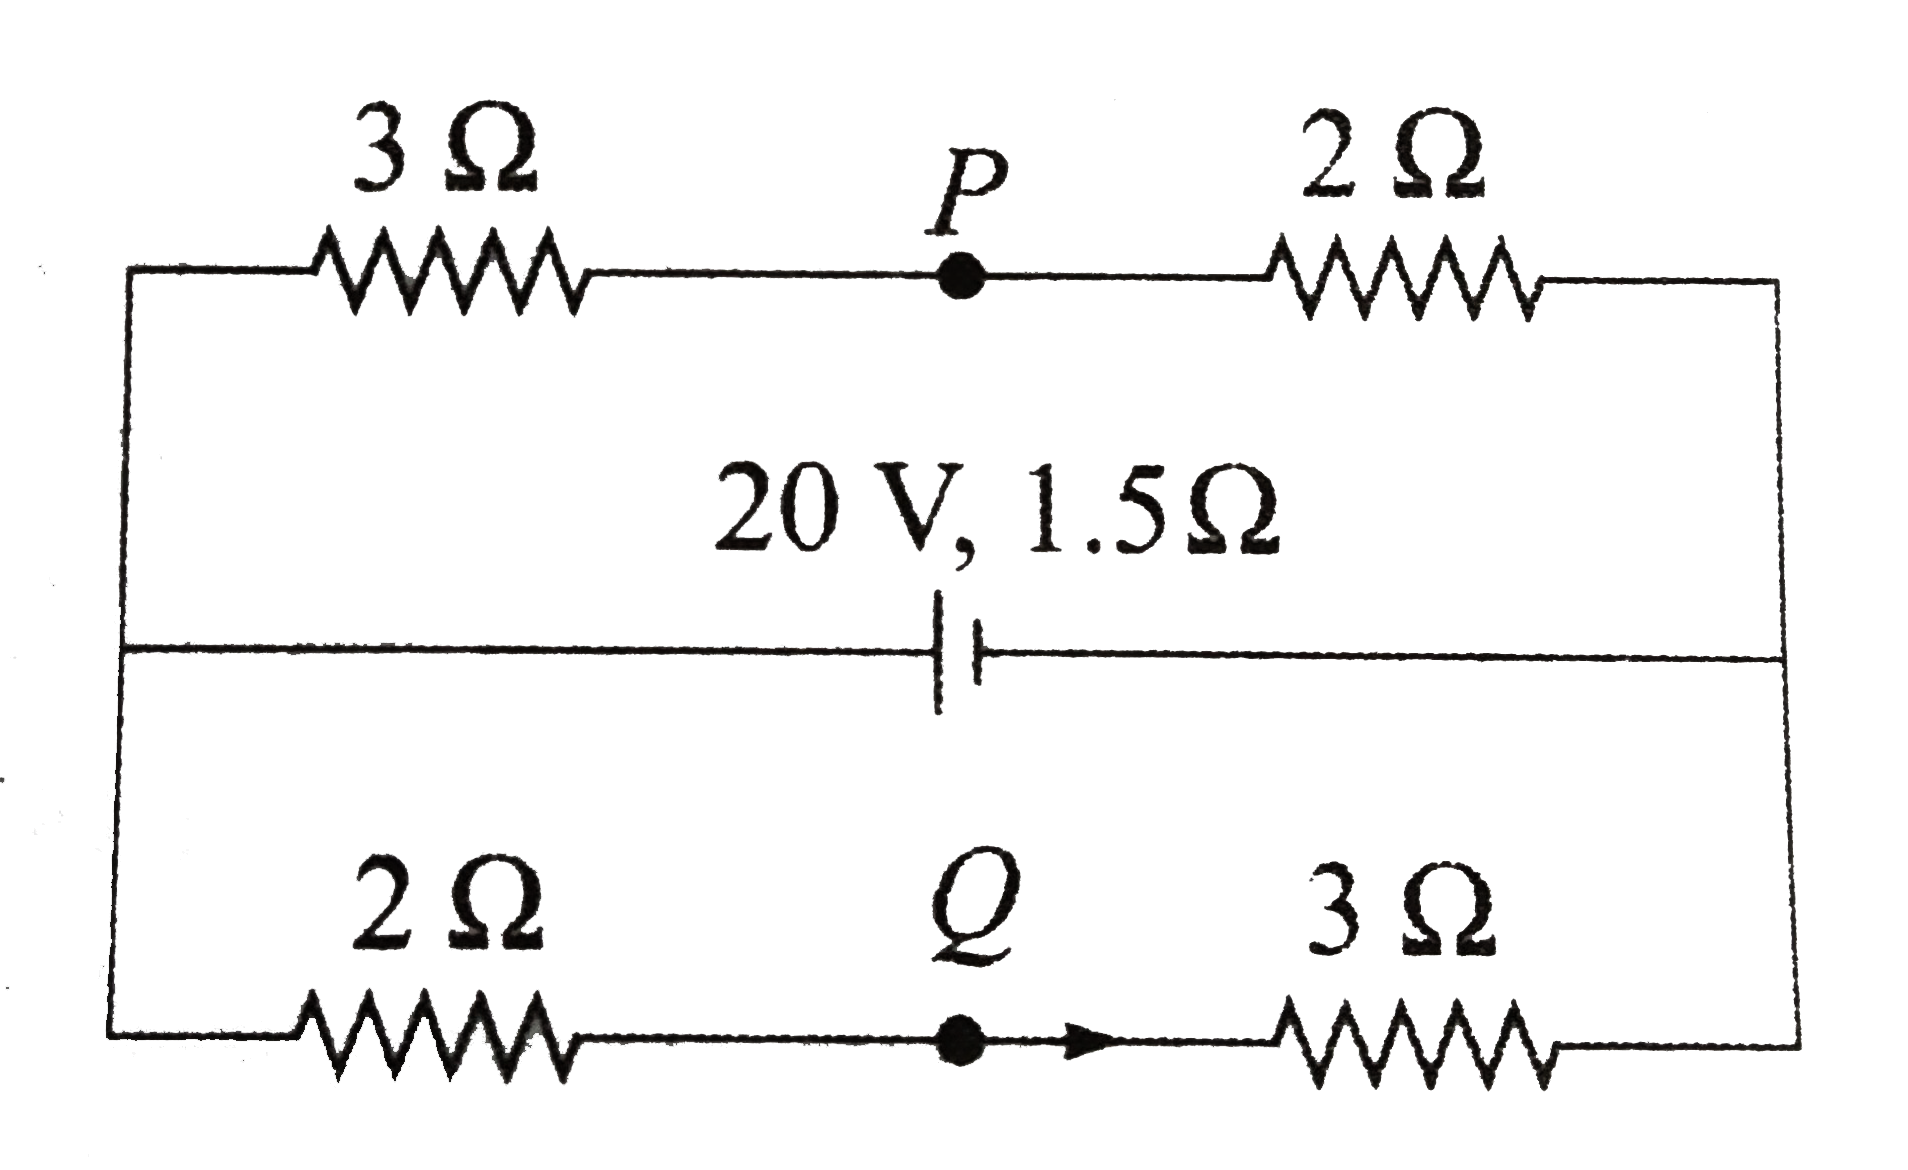 In  the given circuit figure